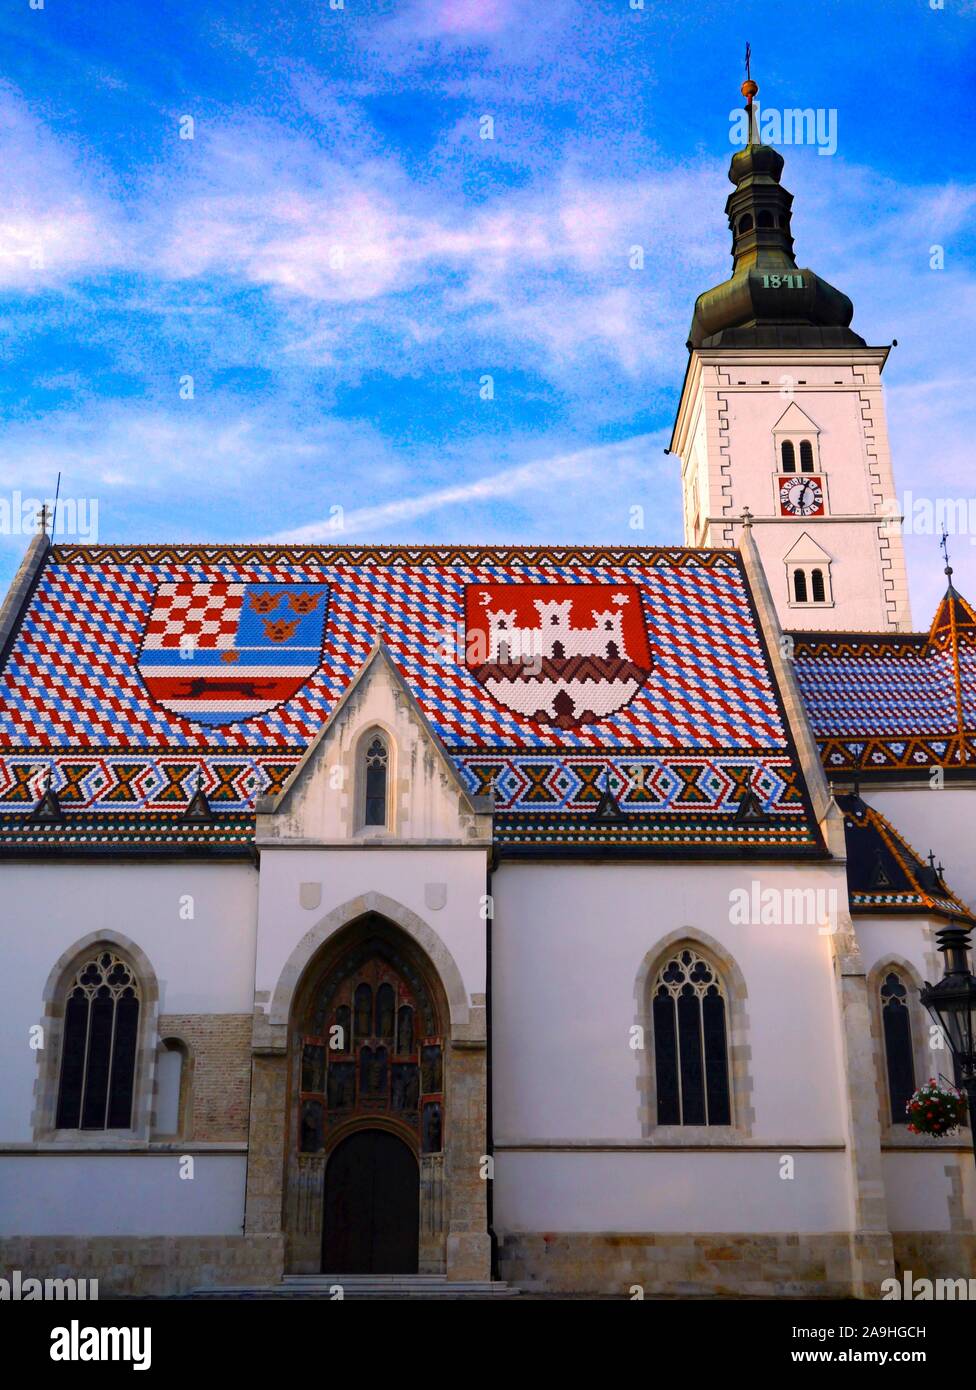 St. Mark's Church Tower, Upper Town, one of the oldest building monuments in Zagreb, Croatia Stock Photo